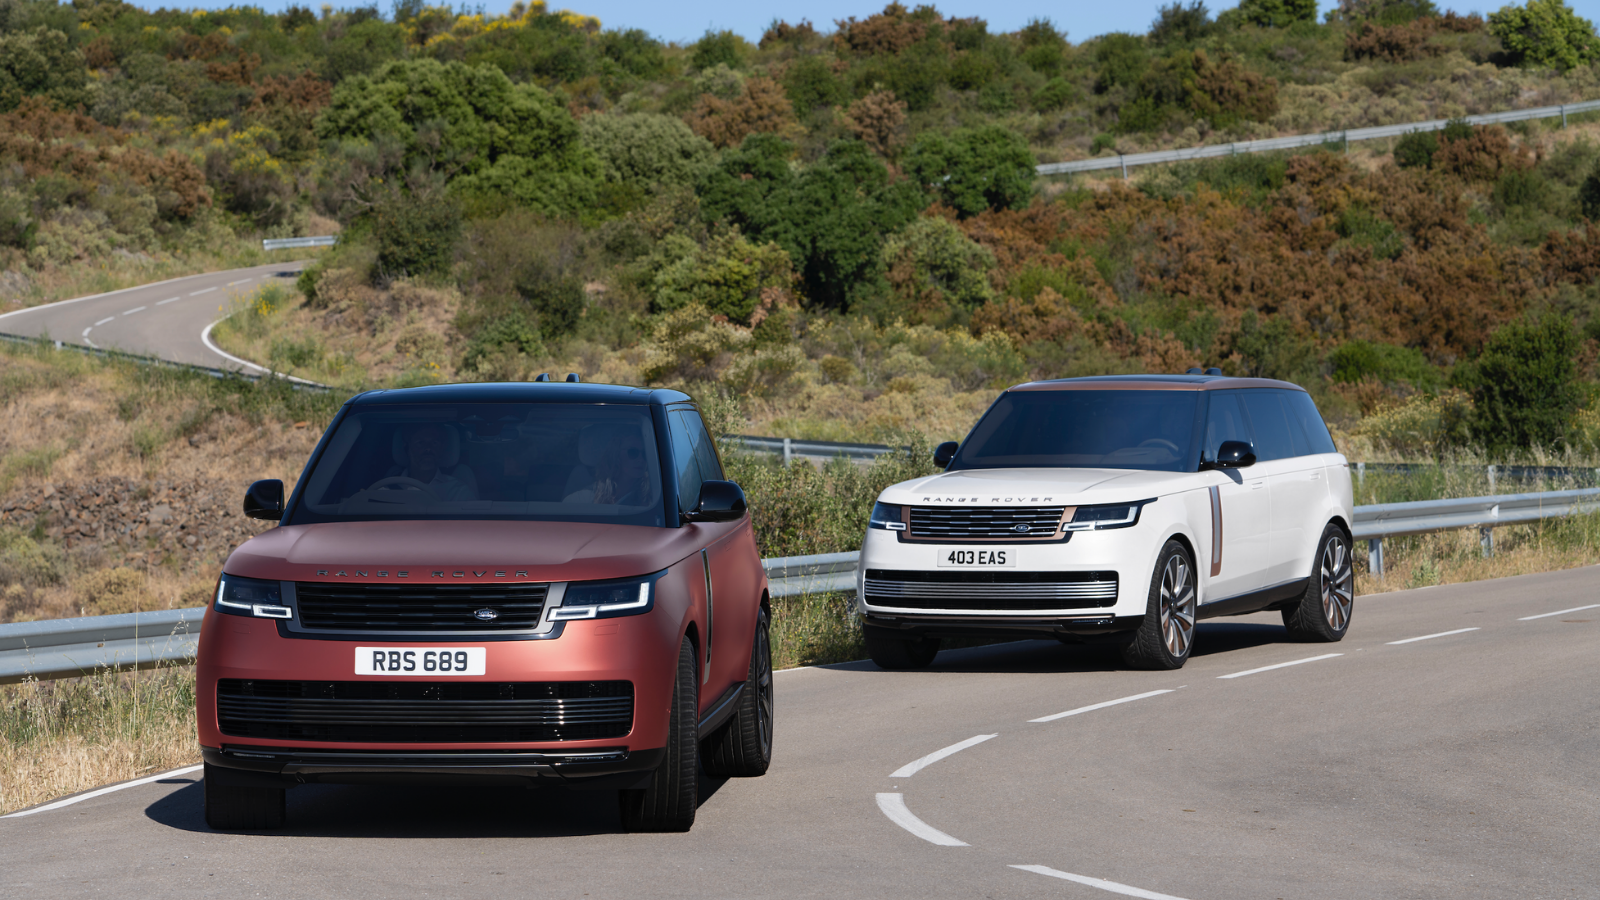 NEW RANGE ROVER SV: HOW INNOVATIVE AND EXQUISITE MATERIALS DEFINE MODERN LUXURY FROM SPECIAL VEHICLE OPERATIONS